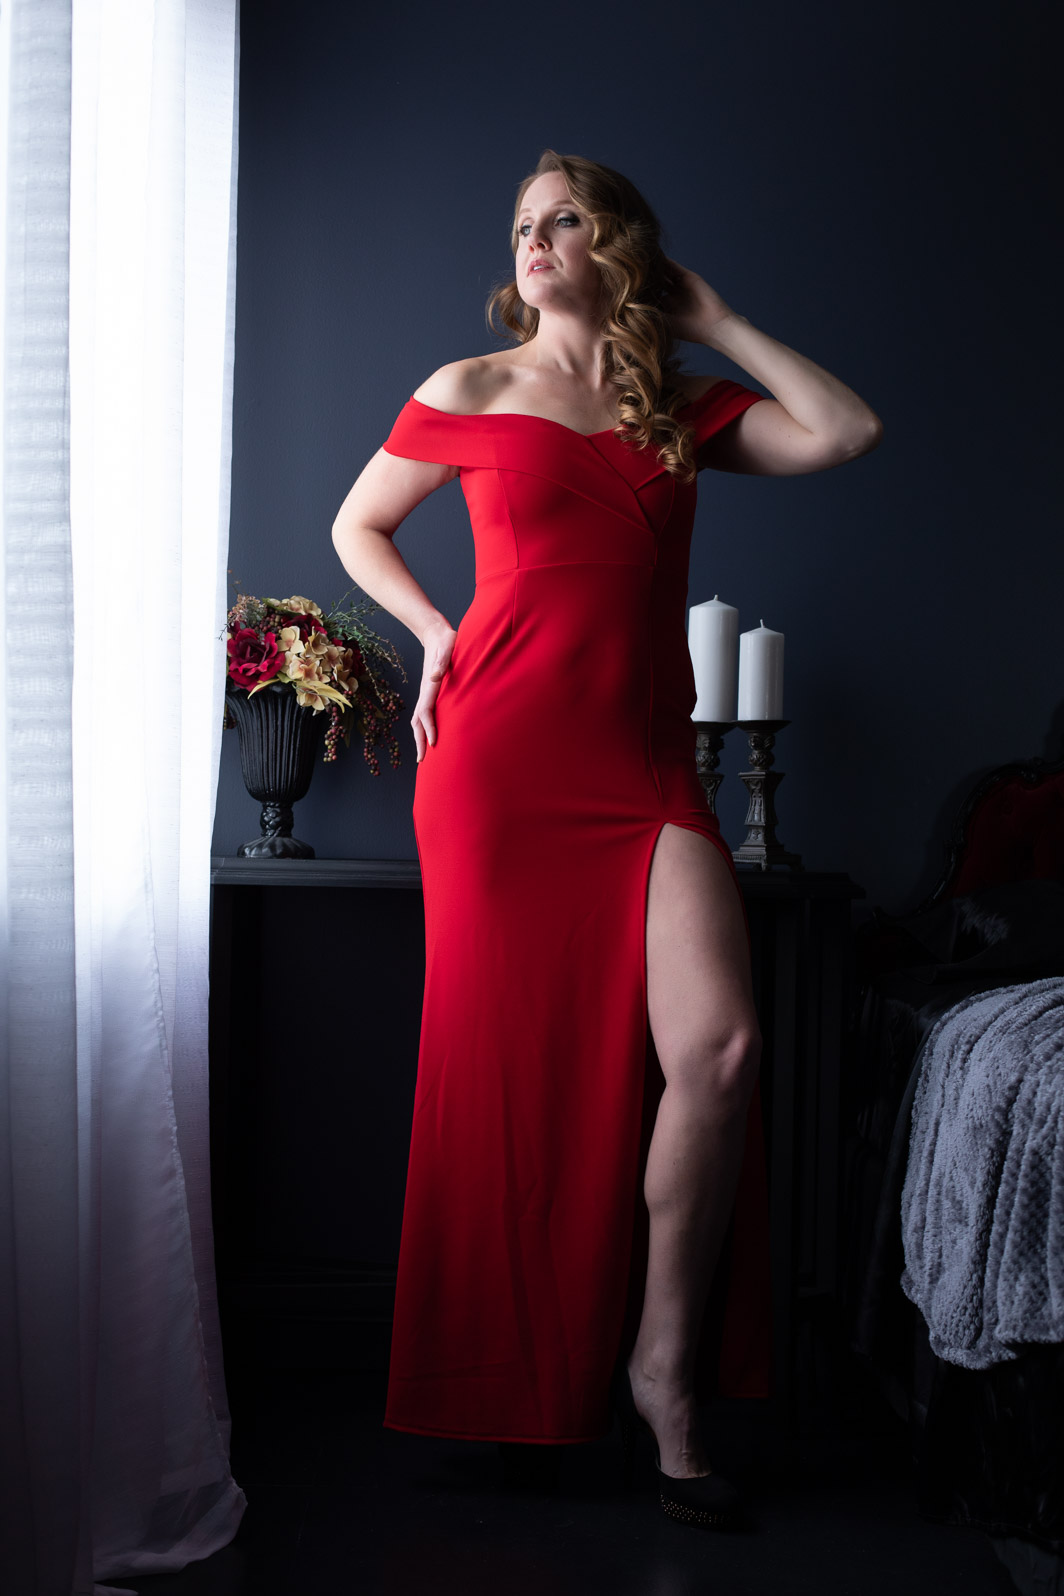 Boudoir Photography "a celebration of getting ready to turn 40